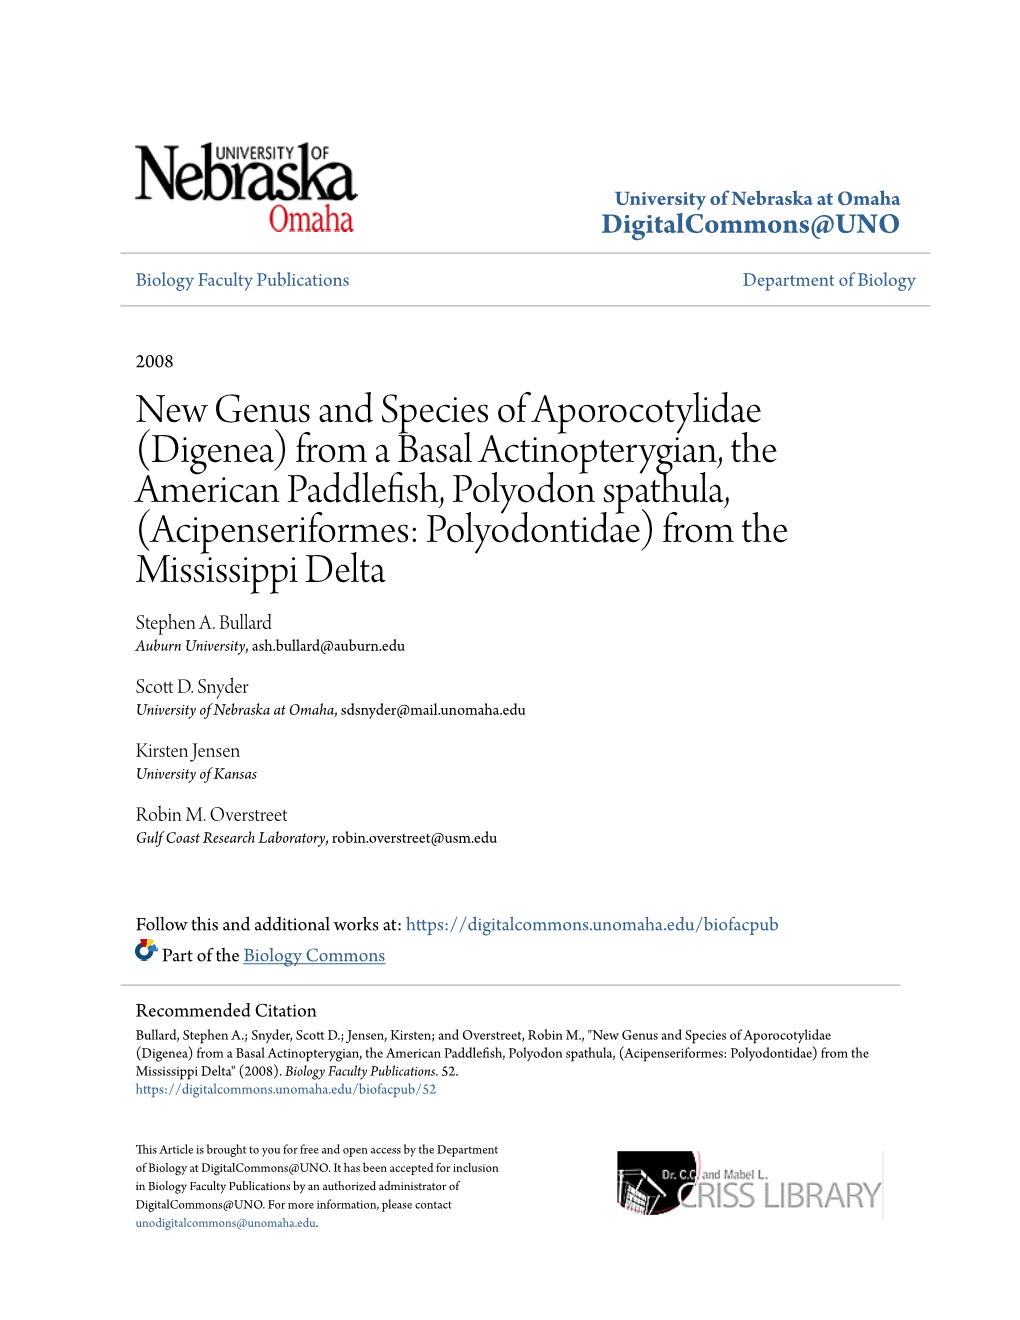 New Genus and Species of Aporocotylidae (Digenea) from A